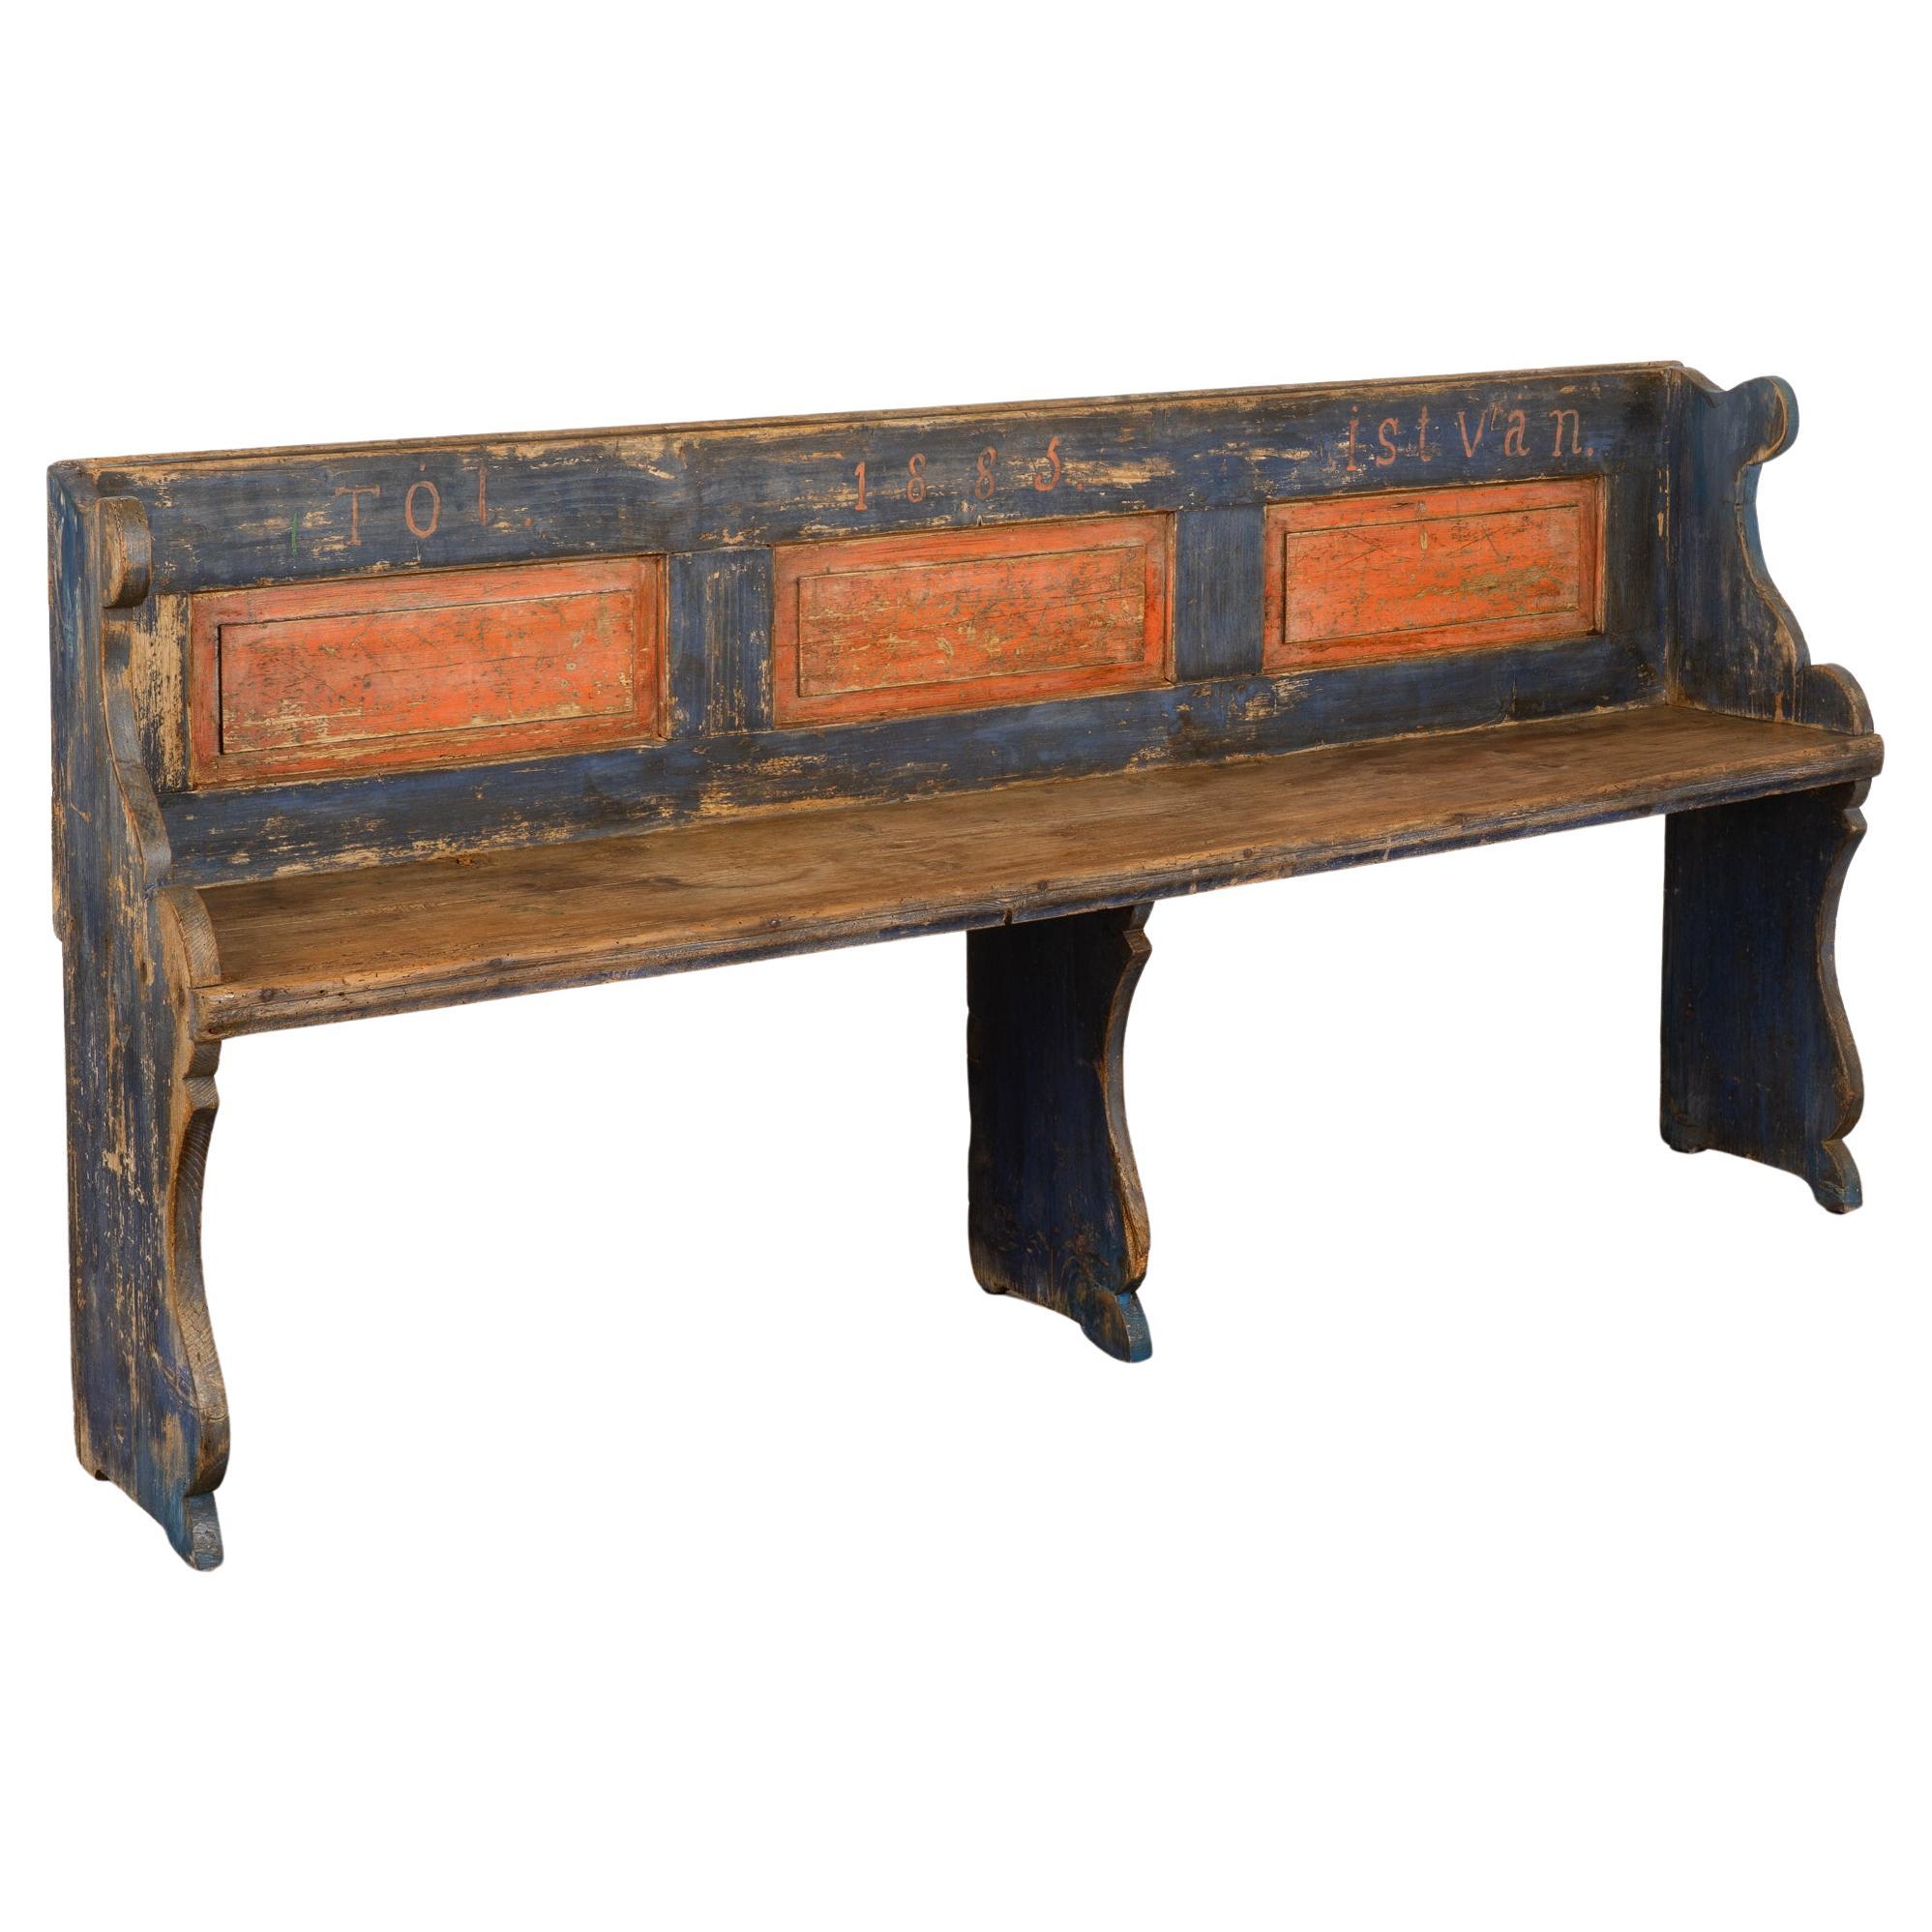 Original Blue Painted Narrow Pine Bench, Hungary dated 1885 For Sale